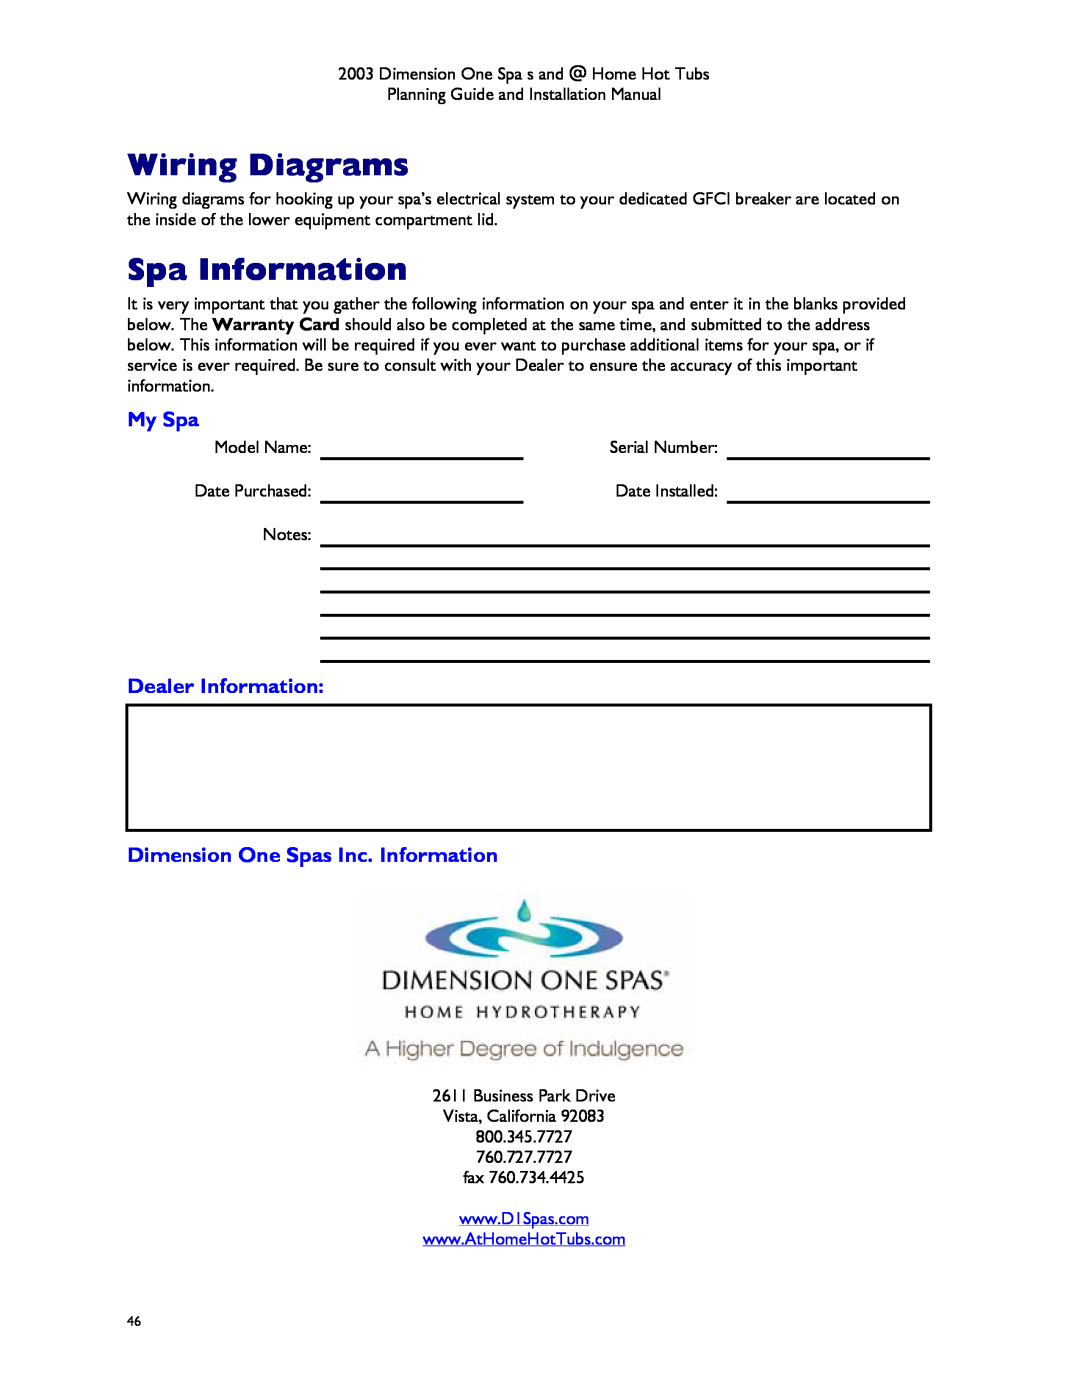 Dimension One Spas Hot Tub manual Wiring Diagrams, Spa Information, My Spa, Dealer Information 